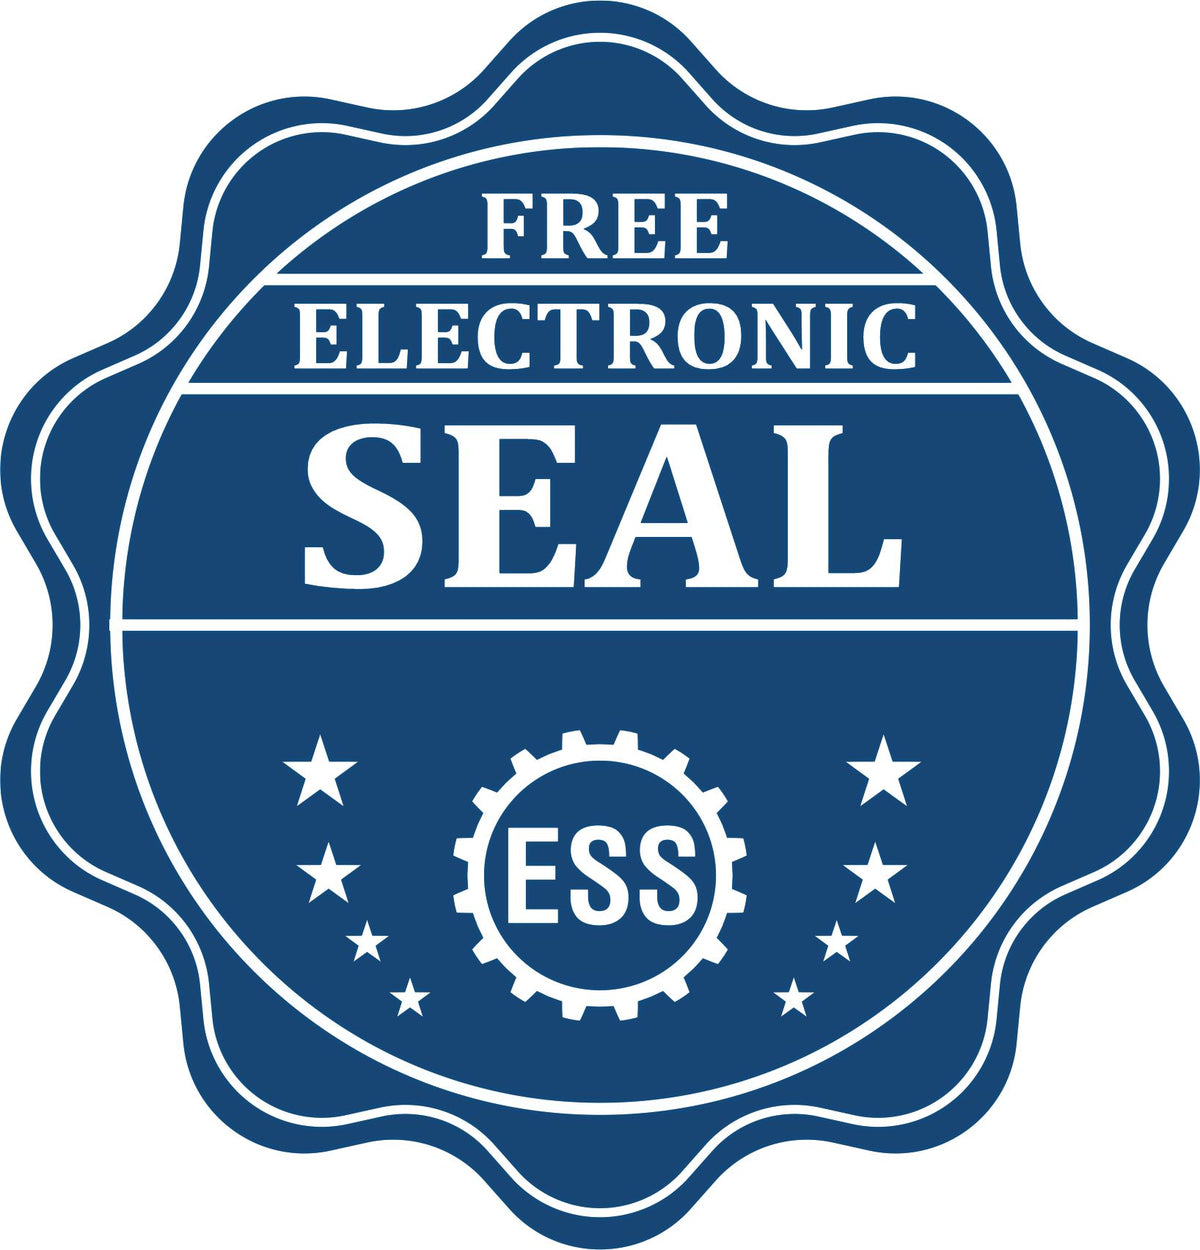 A badge showing a free electronic seal for the Slim Pre-Inked Maryland Landscape Architect Seal Stamp with stars and the ESS gear on the emblem.